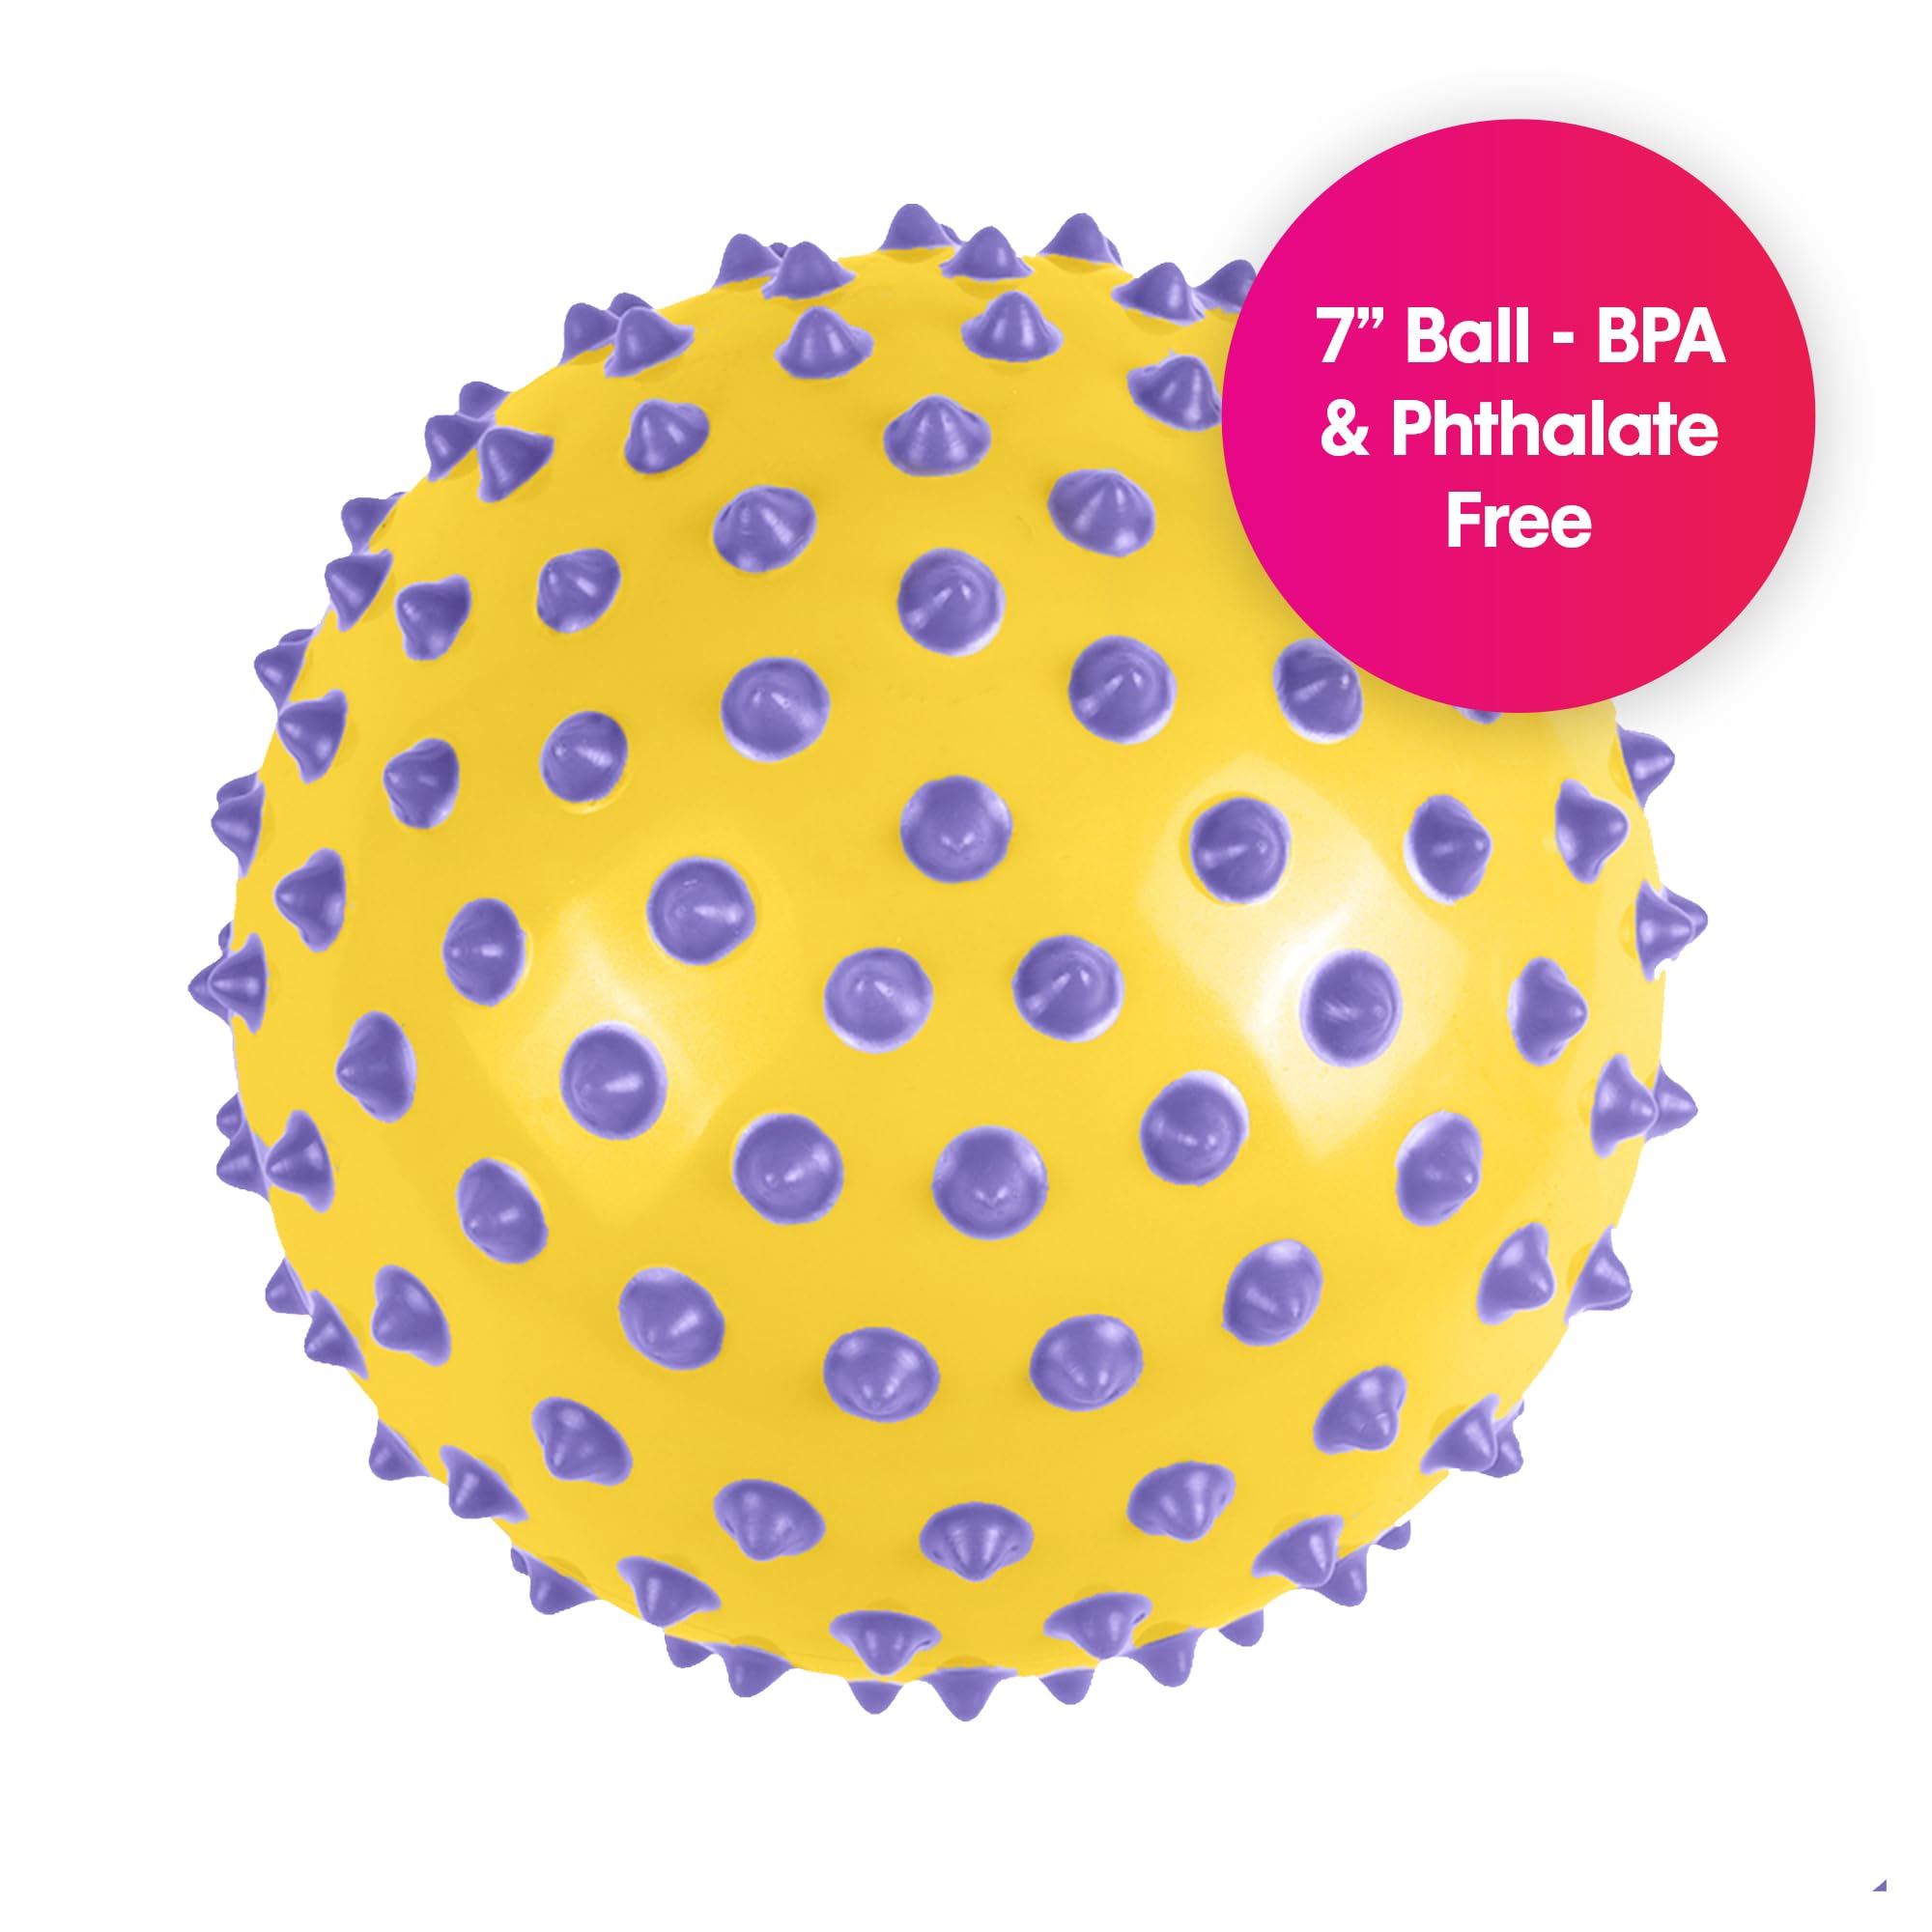 Edushape Sensory Ball for Baby - 7” Yellow/Purple Trendy Color Dots Baby Ball That Helps Enhance Gross Motor Skills for Kids Aged 6 Months & Up - Pack of 1 Vibrant Colorful and Unique Toddler Ball